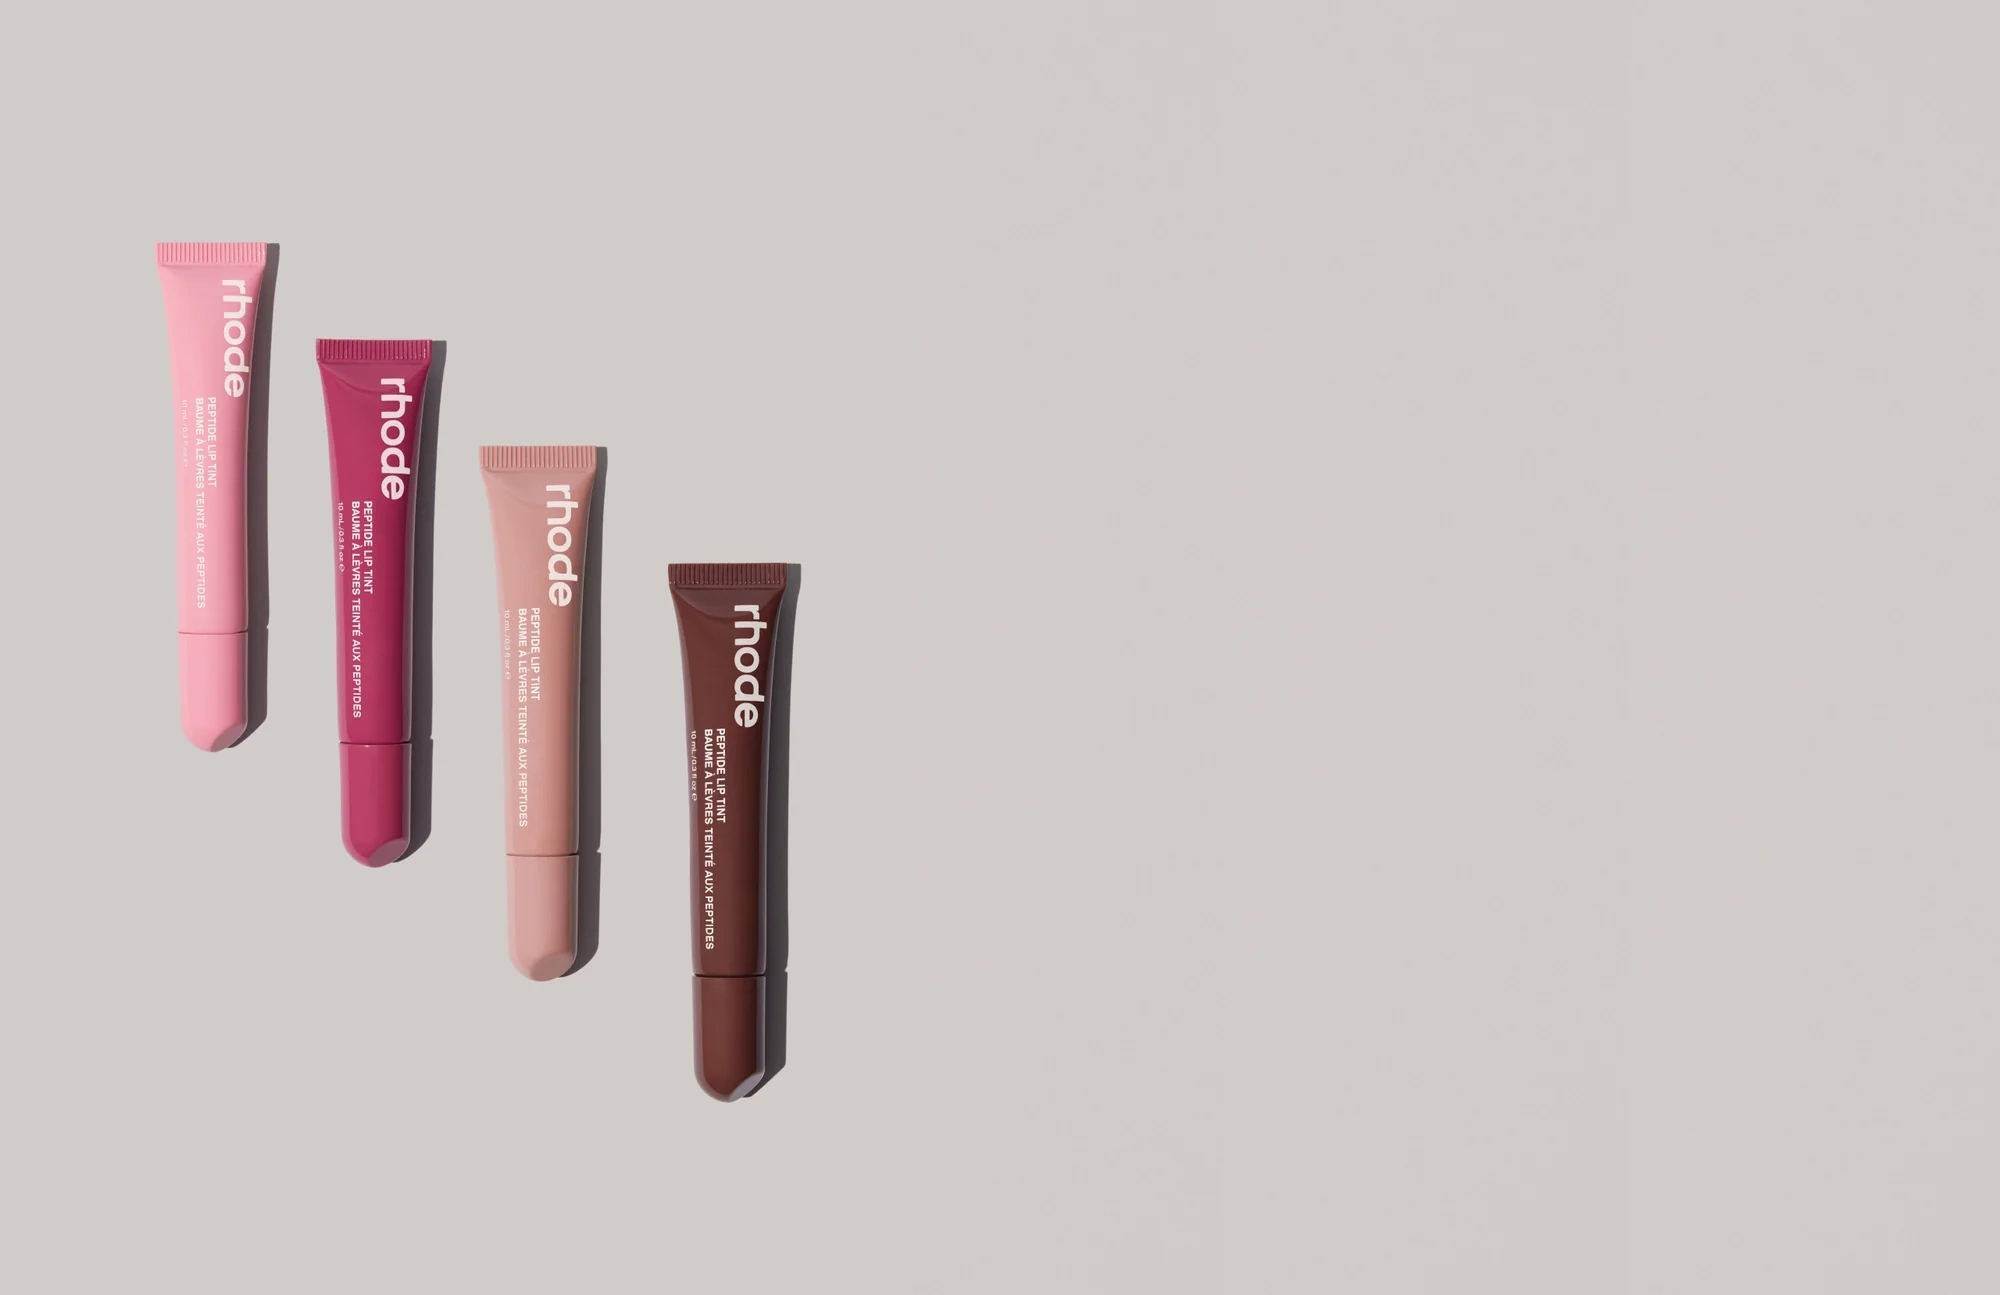 You are currently viewing Rhode Tinted Lip Balm Review: Is It Legit or a Scam?